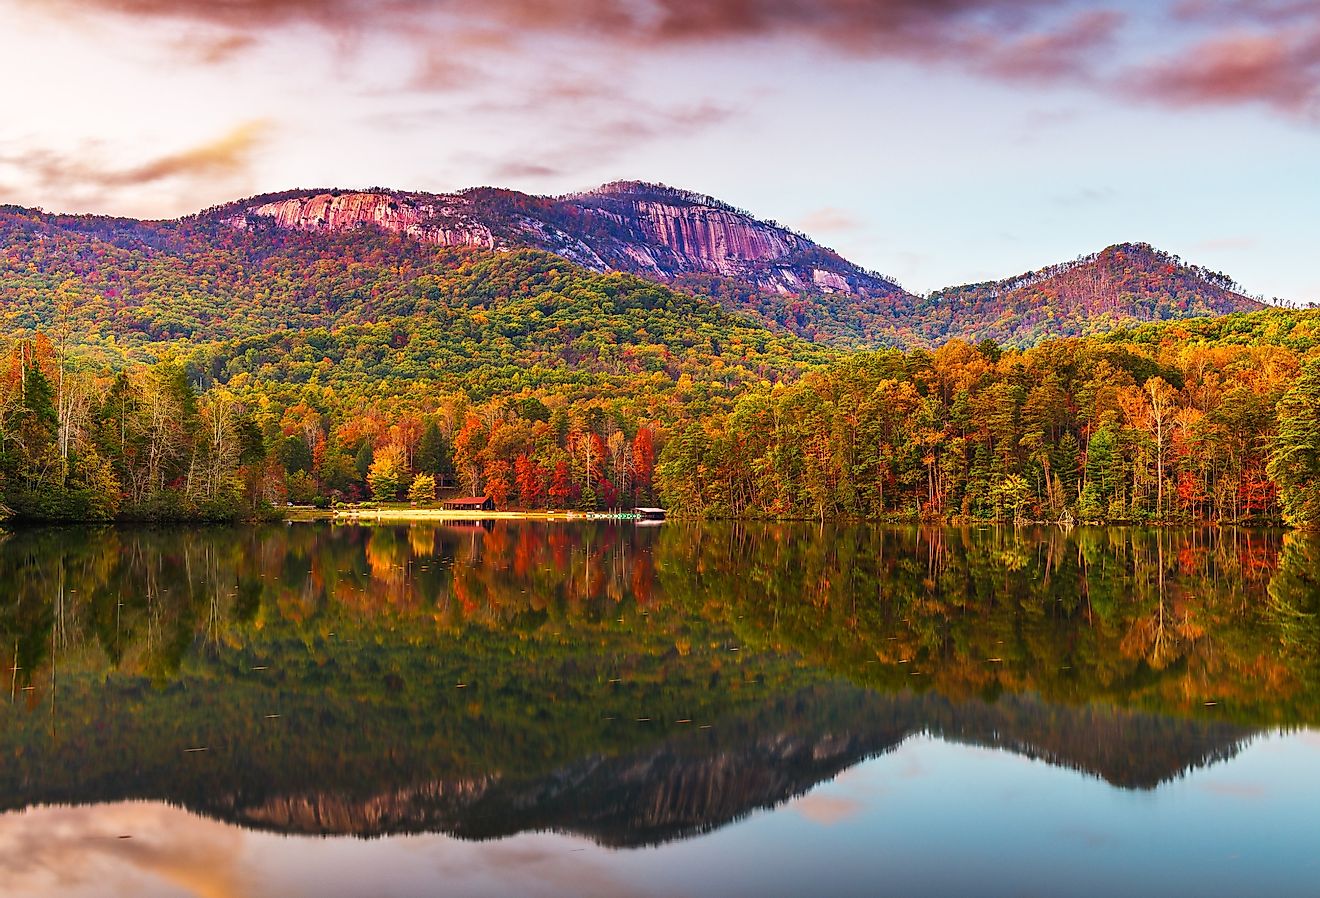 Table Rock Mountain in Pickens, South Carolina, lake view in autumn at dusk.